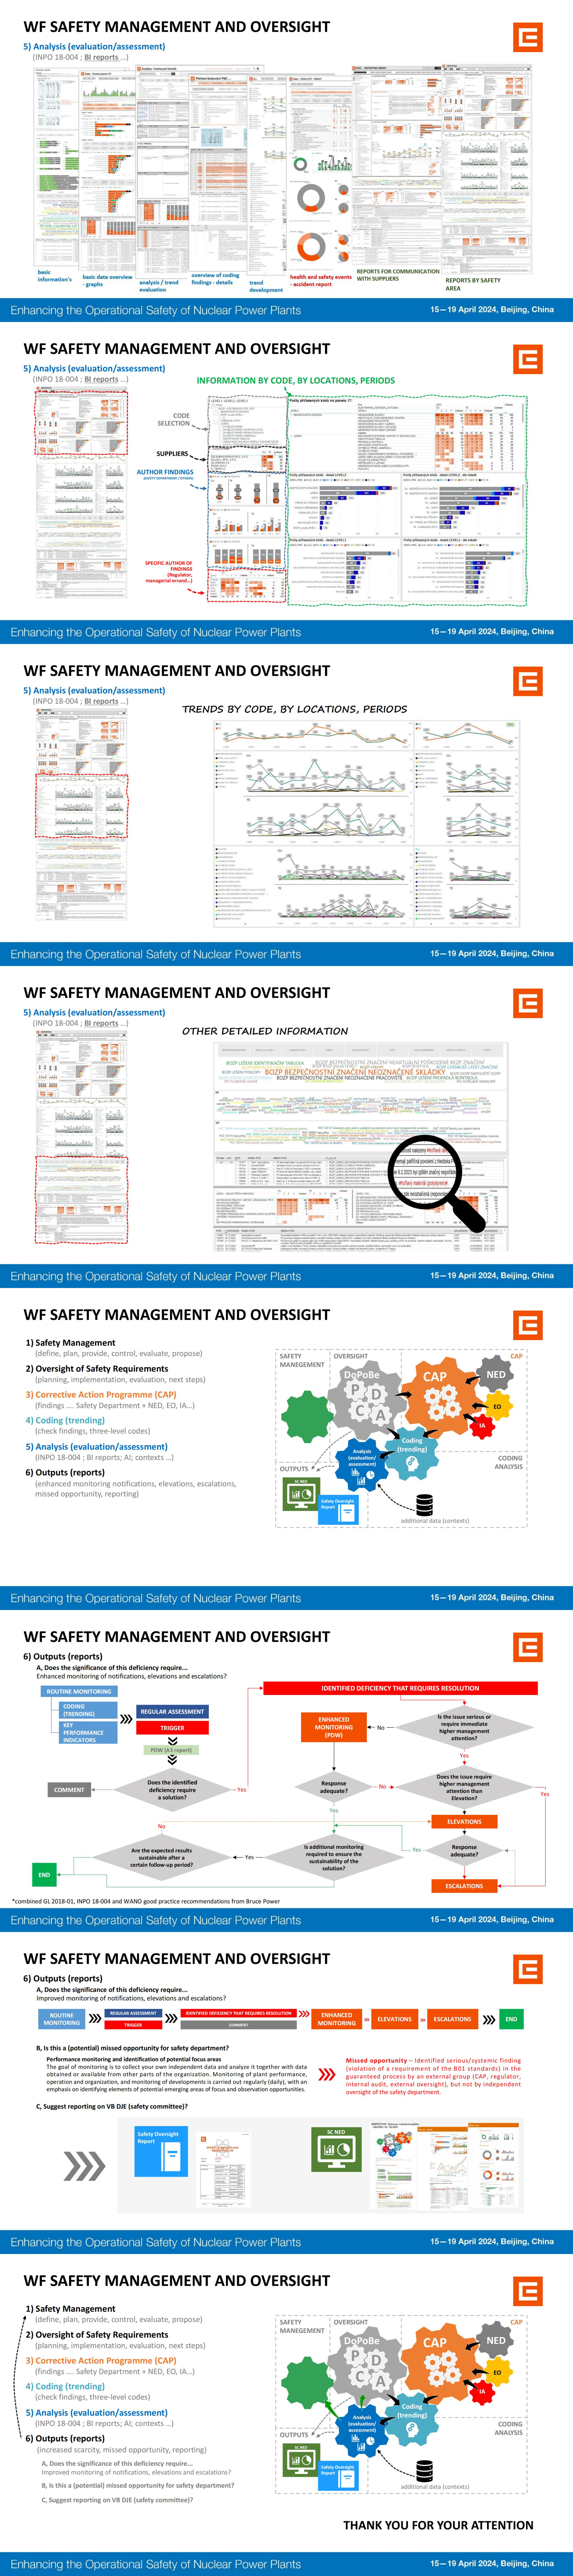 17_12_ P Mestan_Safety Oversight for the Division of NPPs_01.jpg